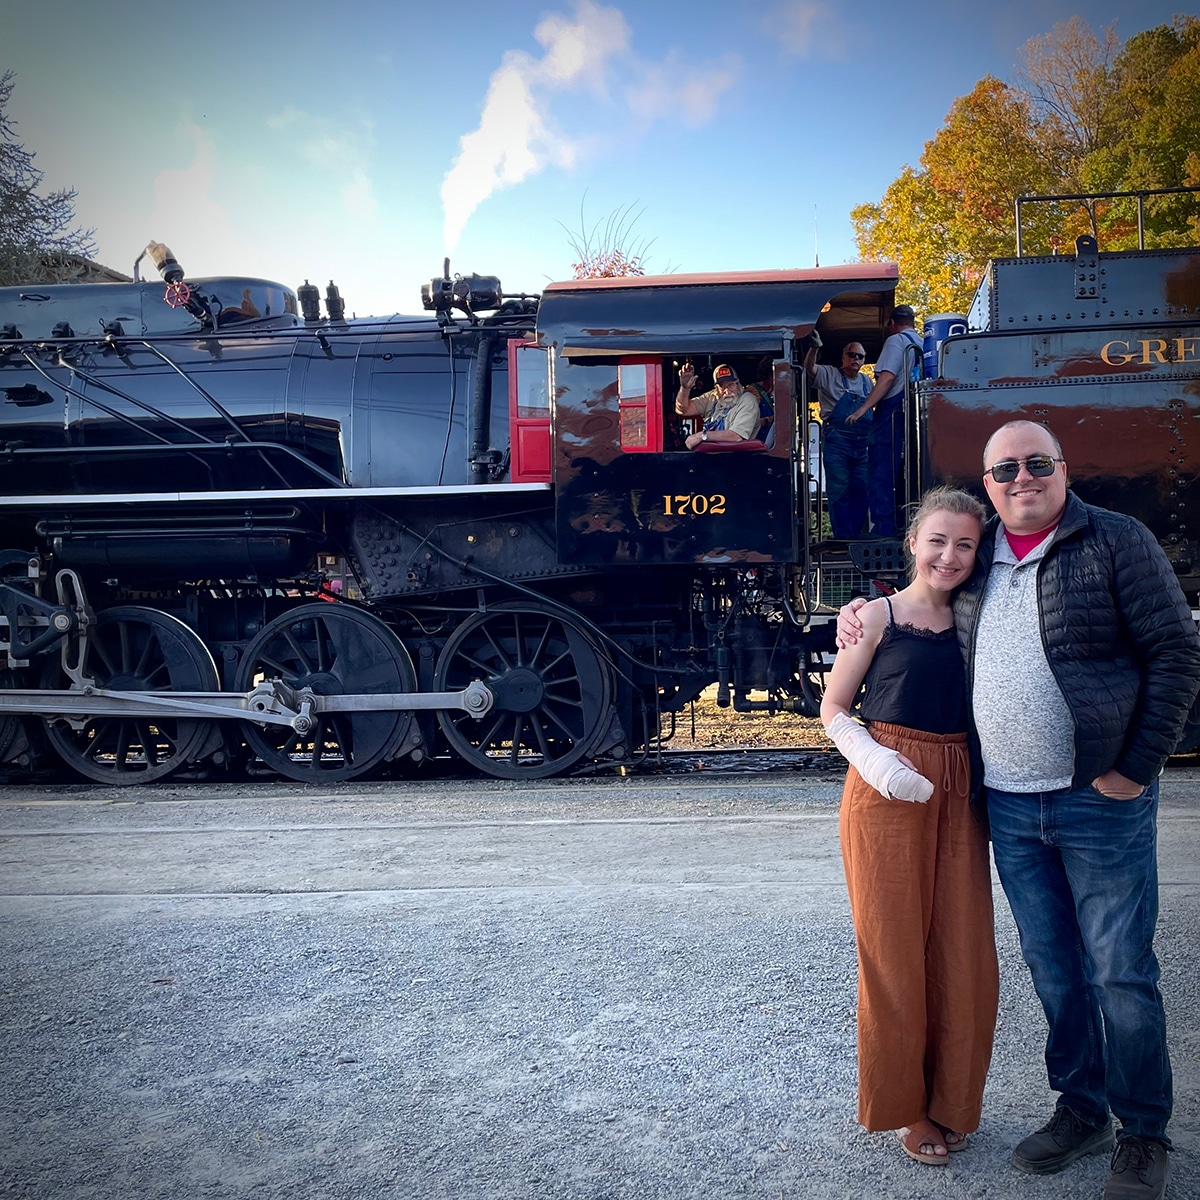 Steve and Annie standing in front of the Great Smoky Mountain Railroad steam engine.